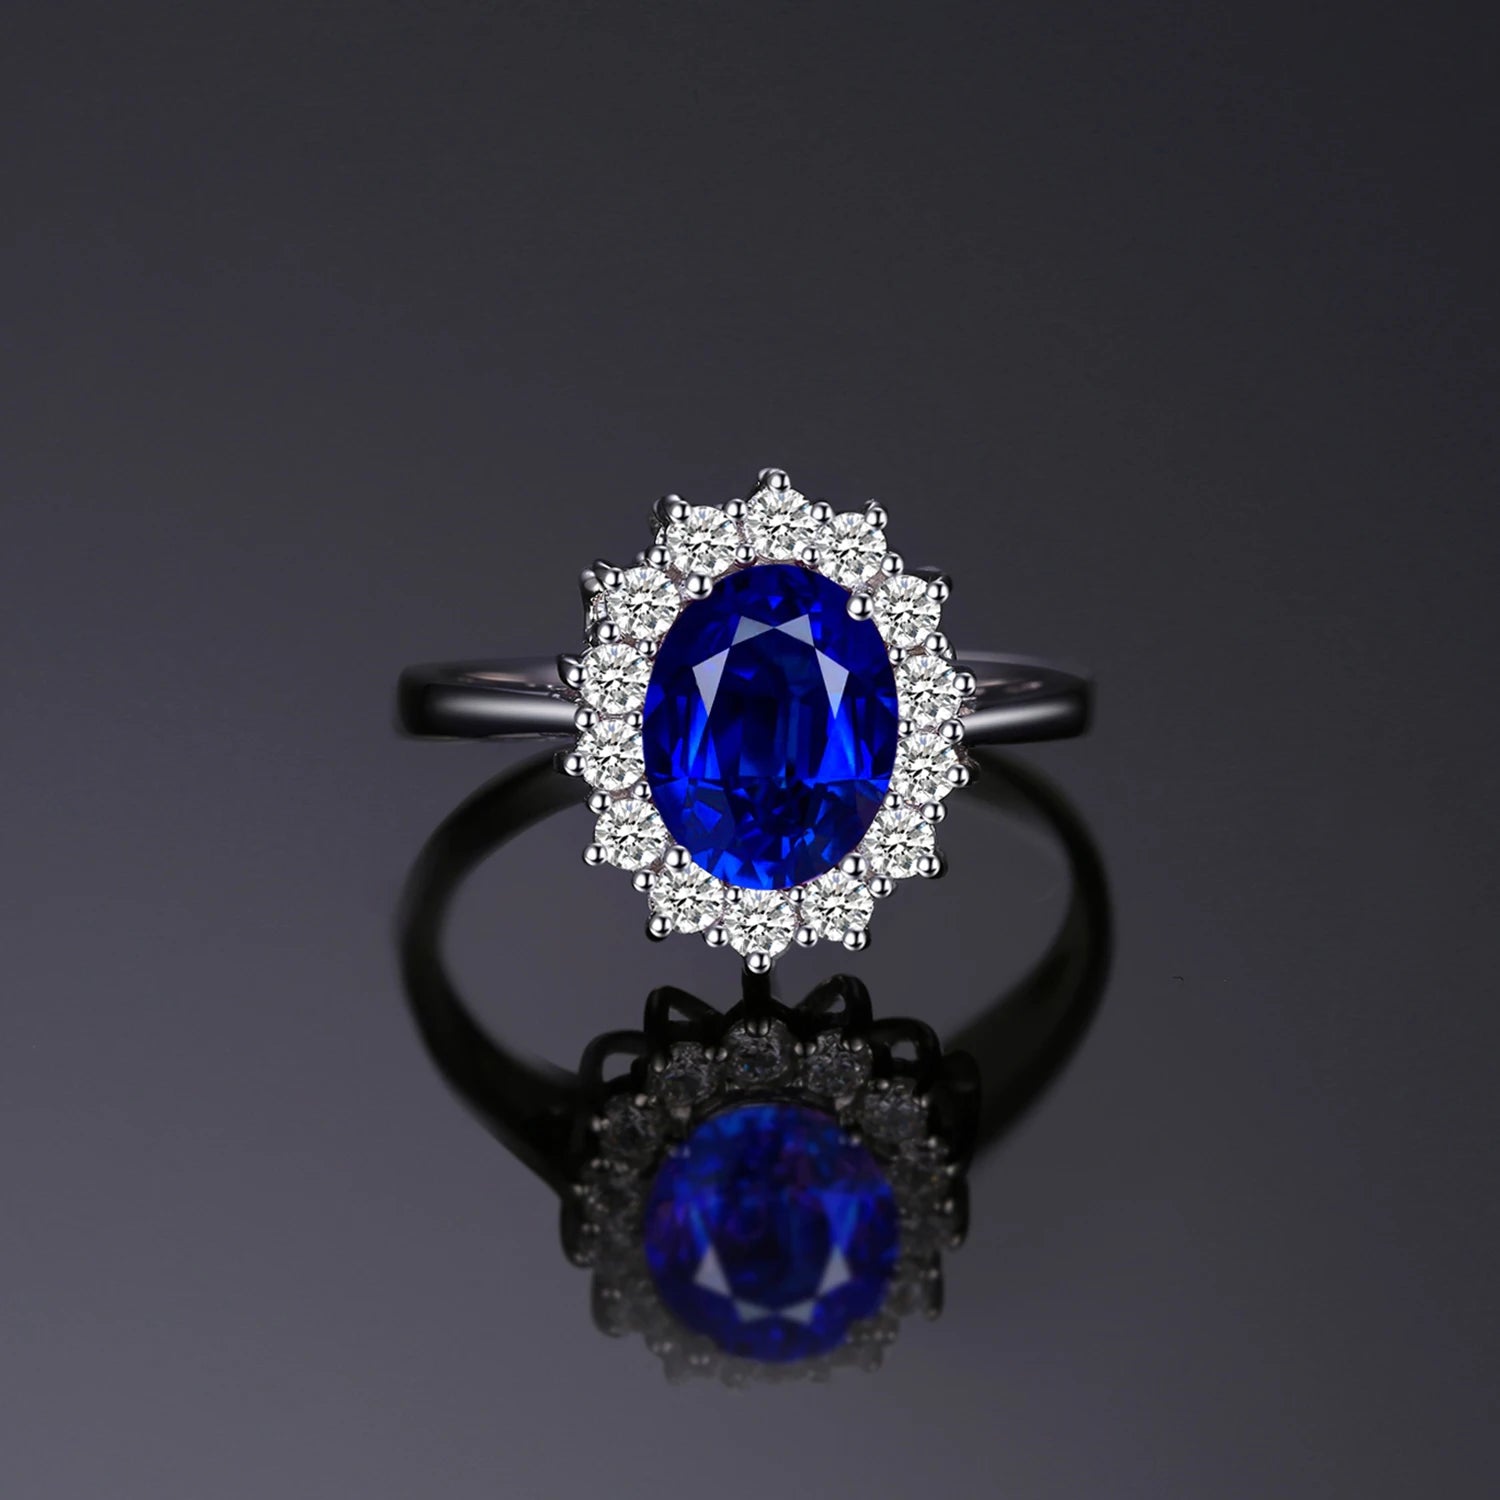 Princess Diana Created Blue Sapphire 925 Sterling Silver Engagement Ring Ruby Natural Amethyst Citrine Blue Topaz